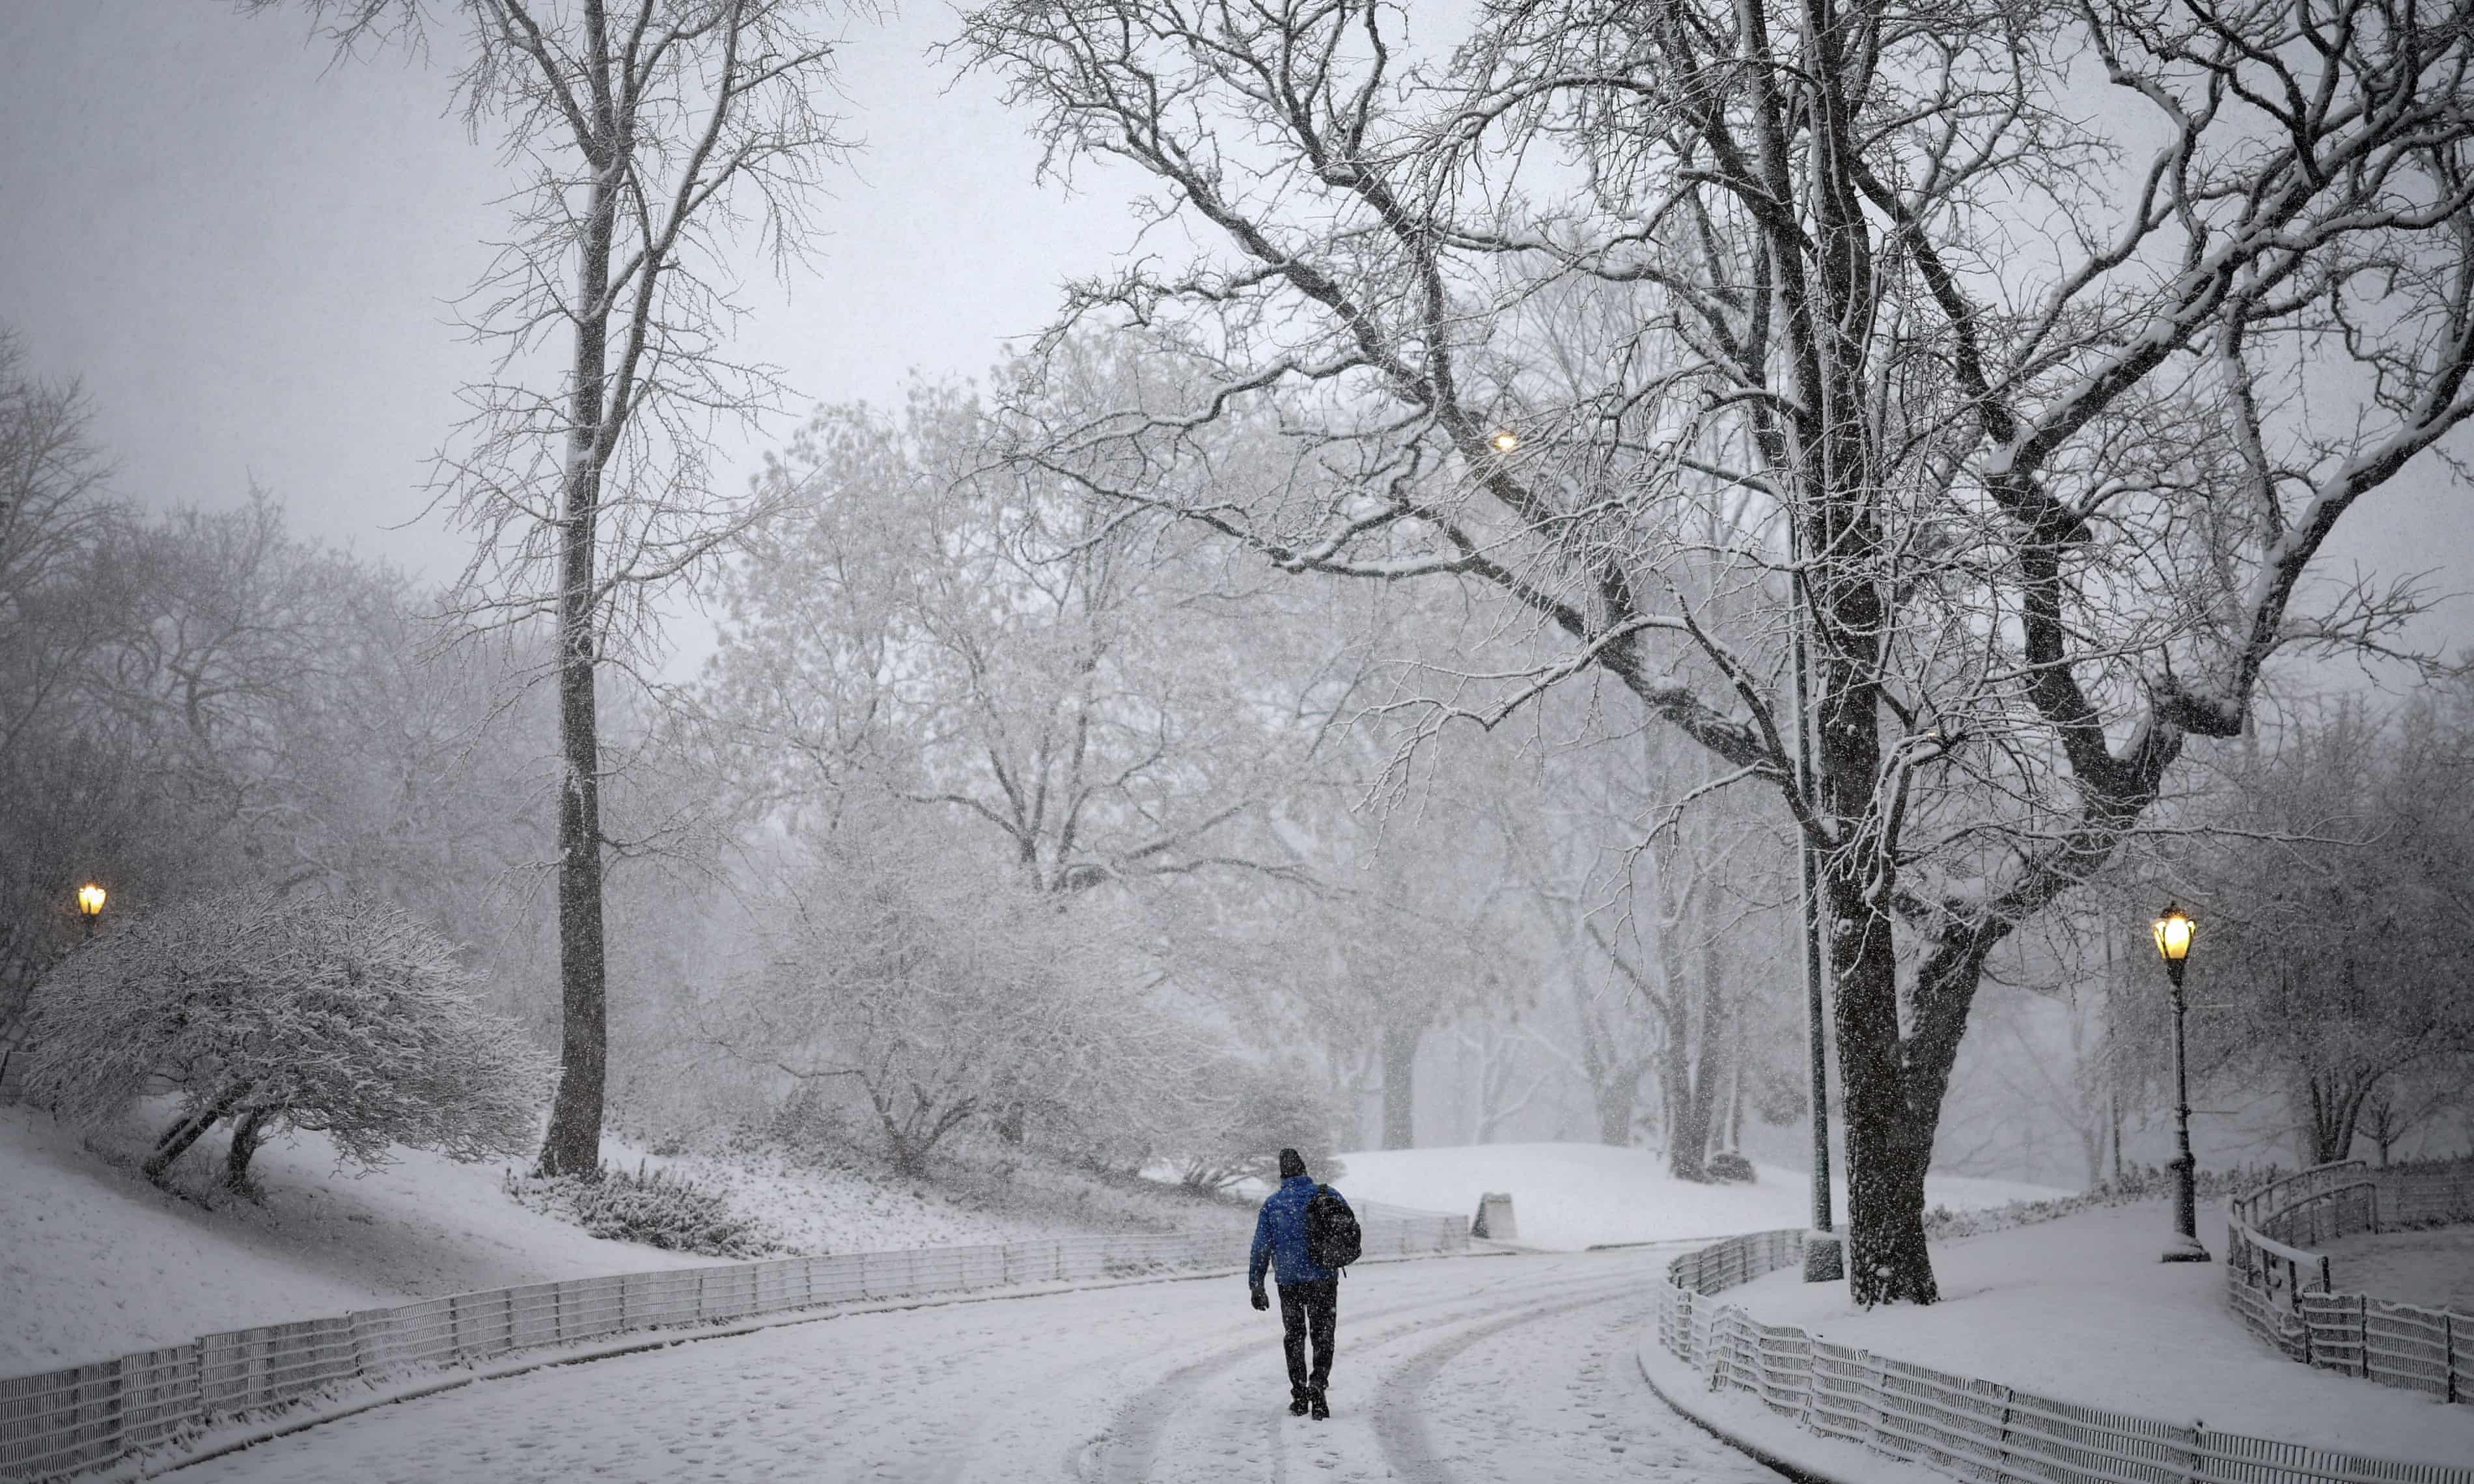 Snow from nor’easter storm leads to canceled flights in north-eastern US (theguardian.com)